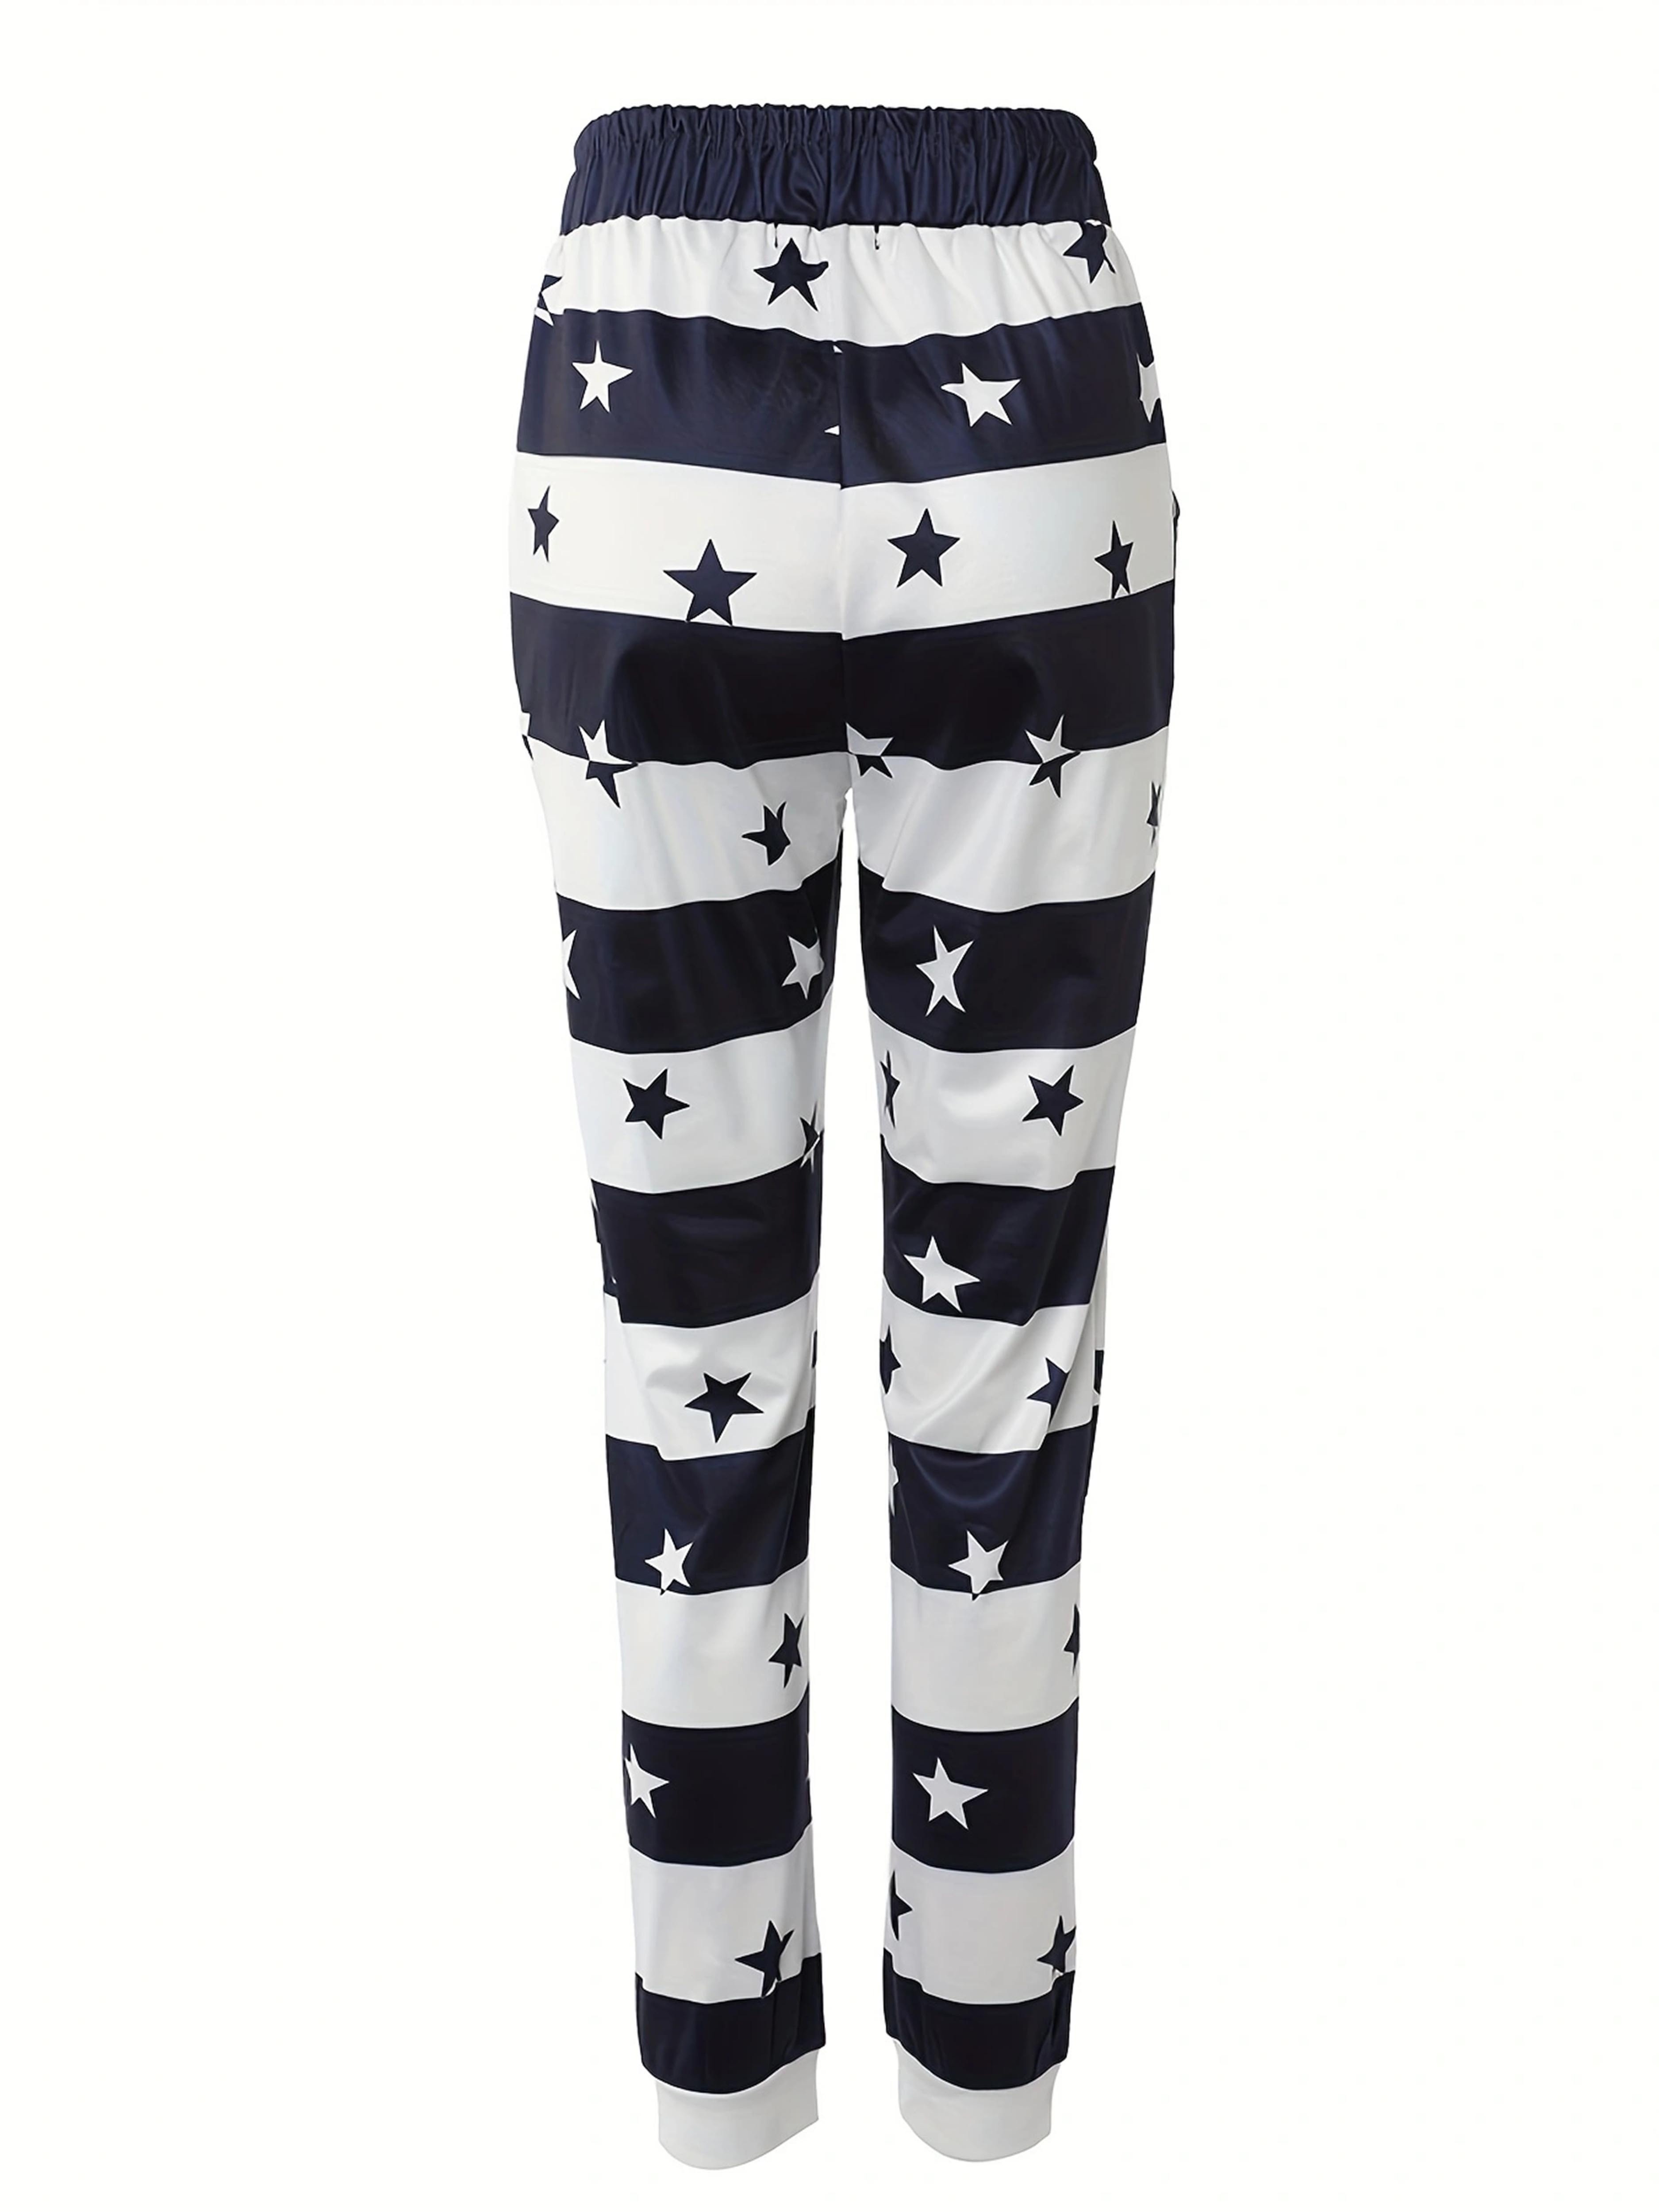 striped star print drawstring pants casual pants for spring summer womens clothing details 2